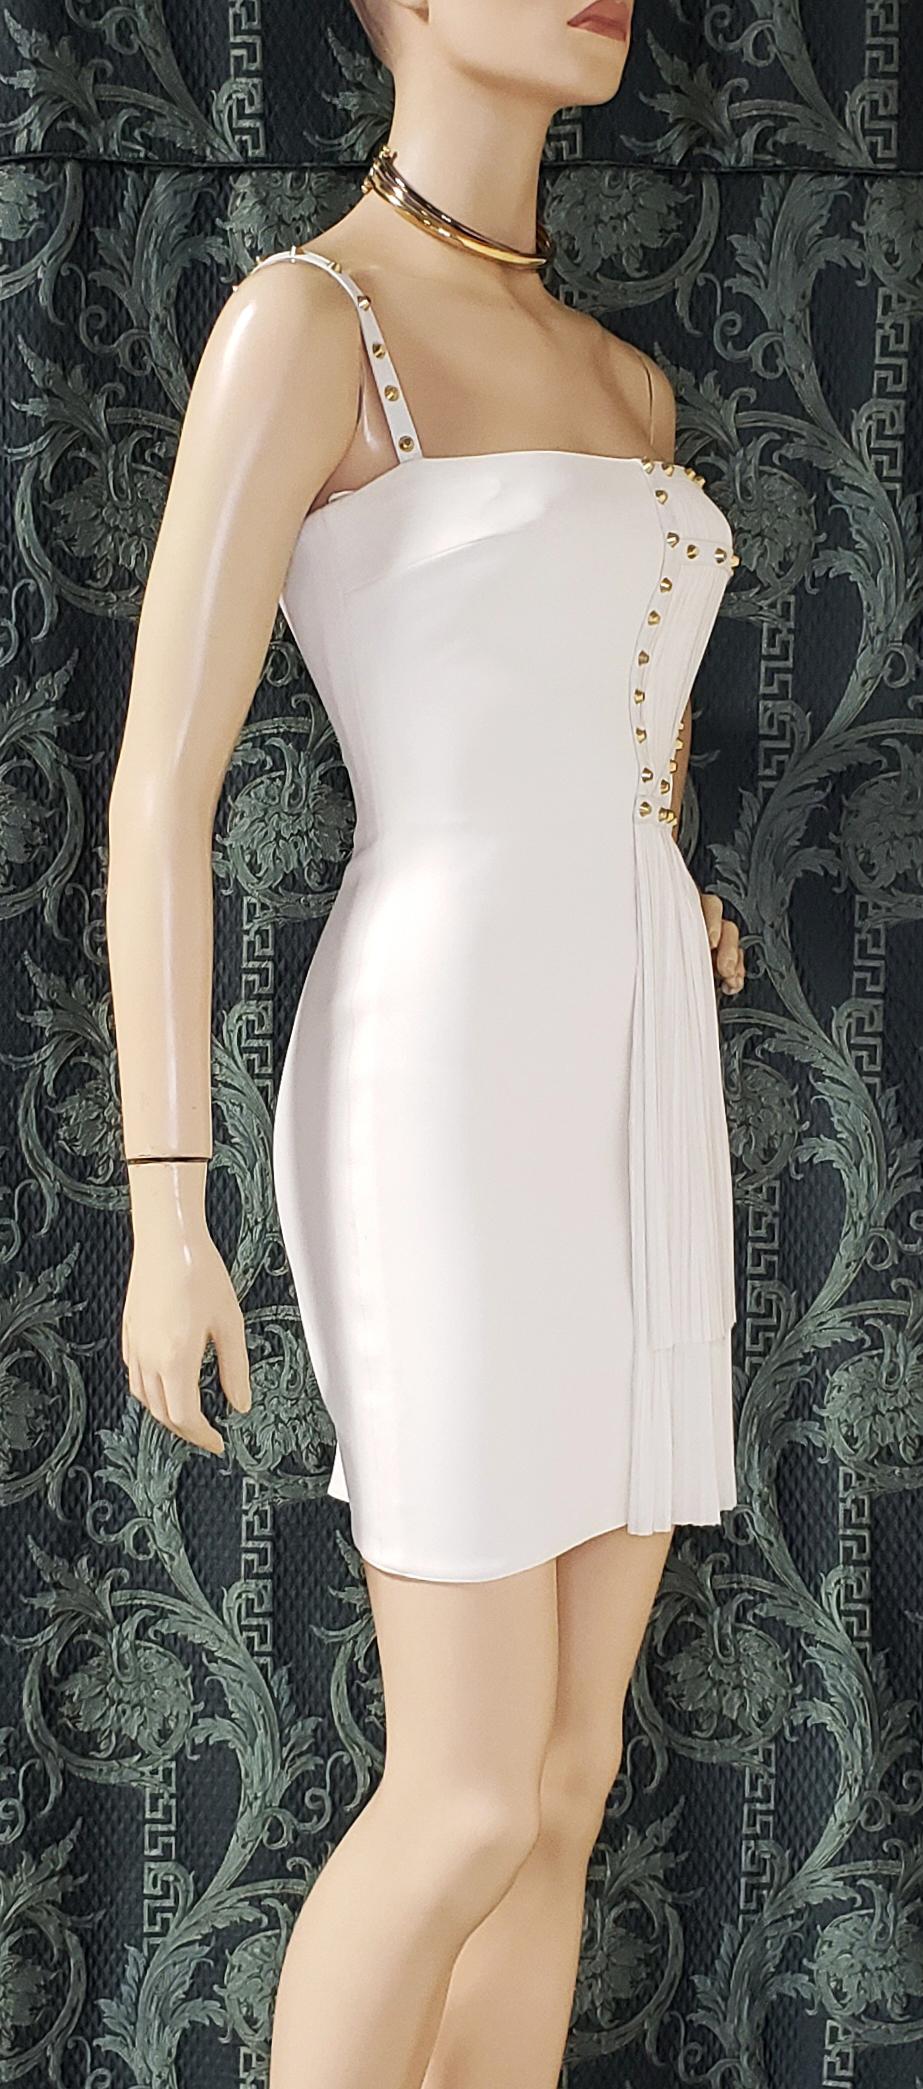 S/S 2012 look # 35 NEW VERSACE ONE SHOULDER WHITE STUDDED DRESS 38 - 2 6